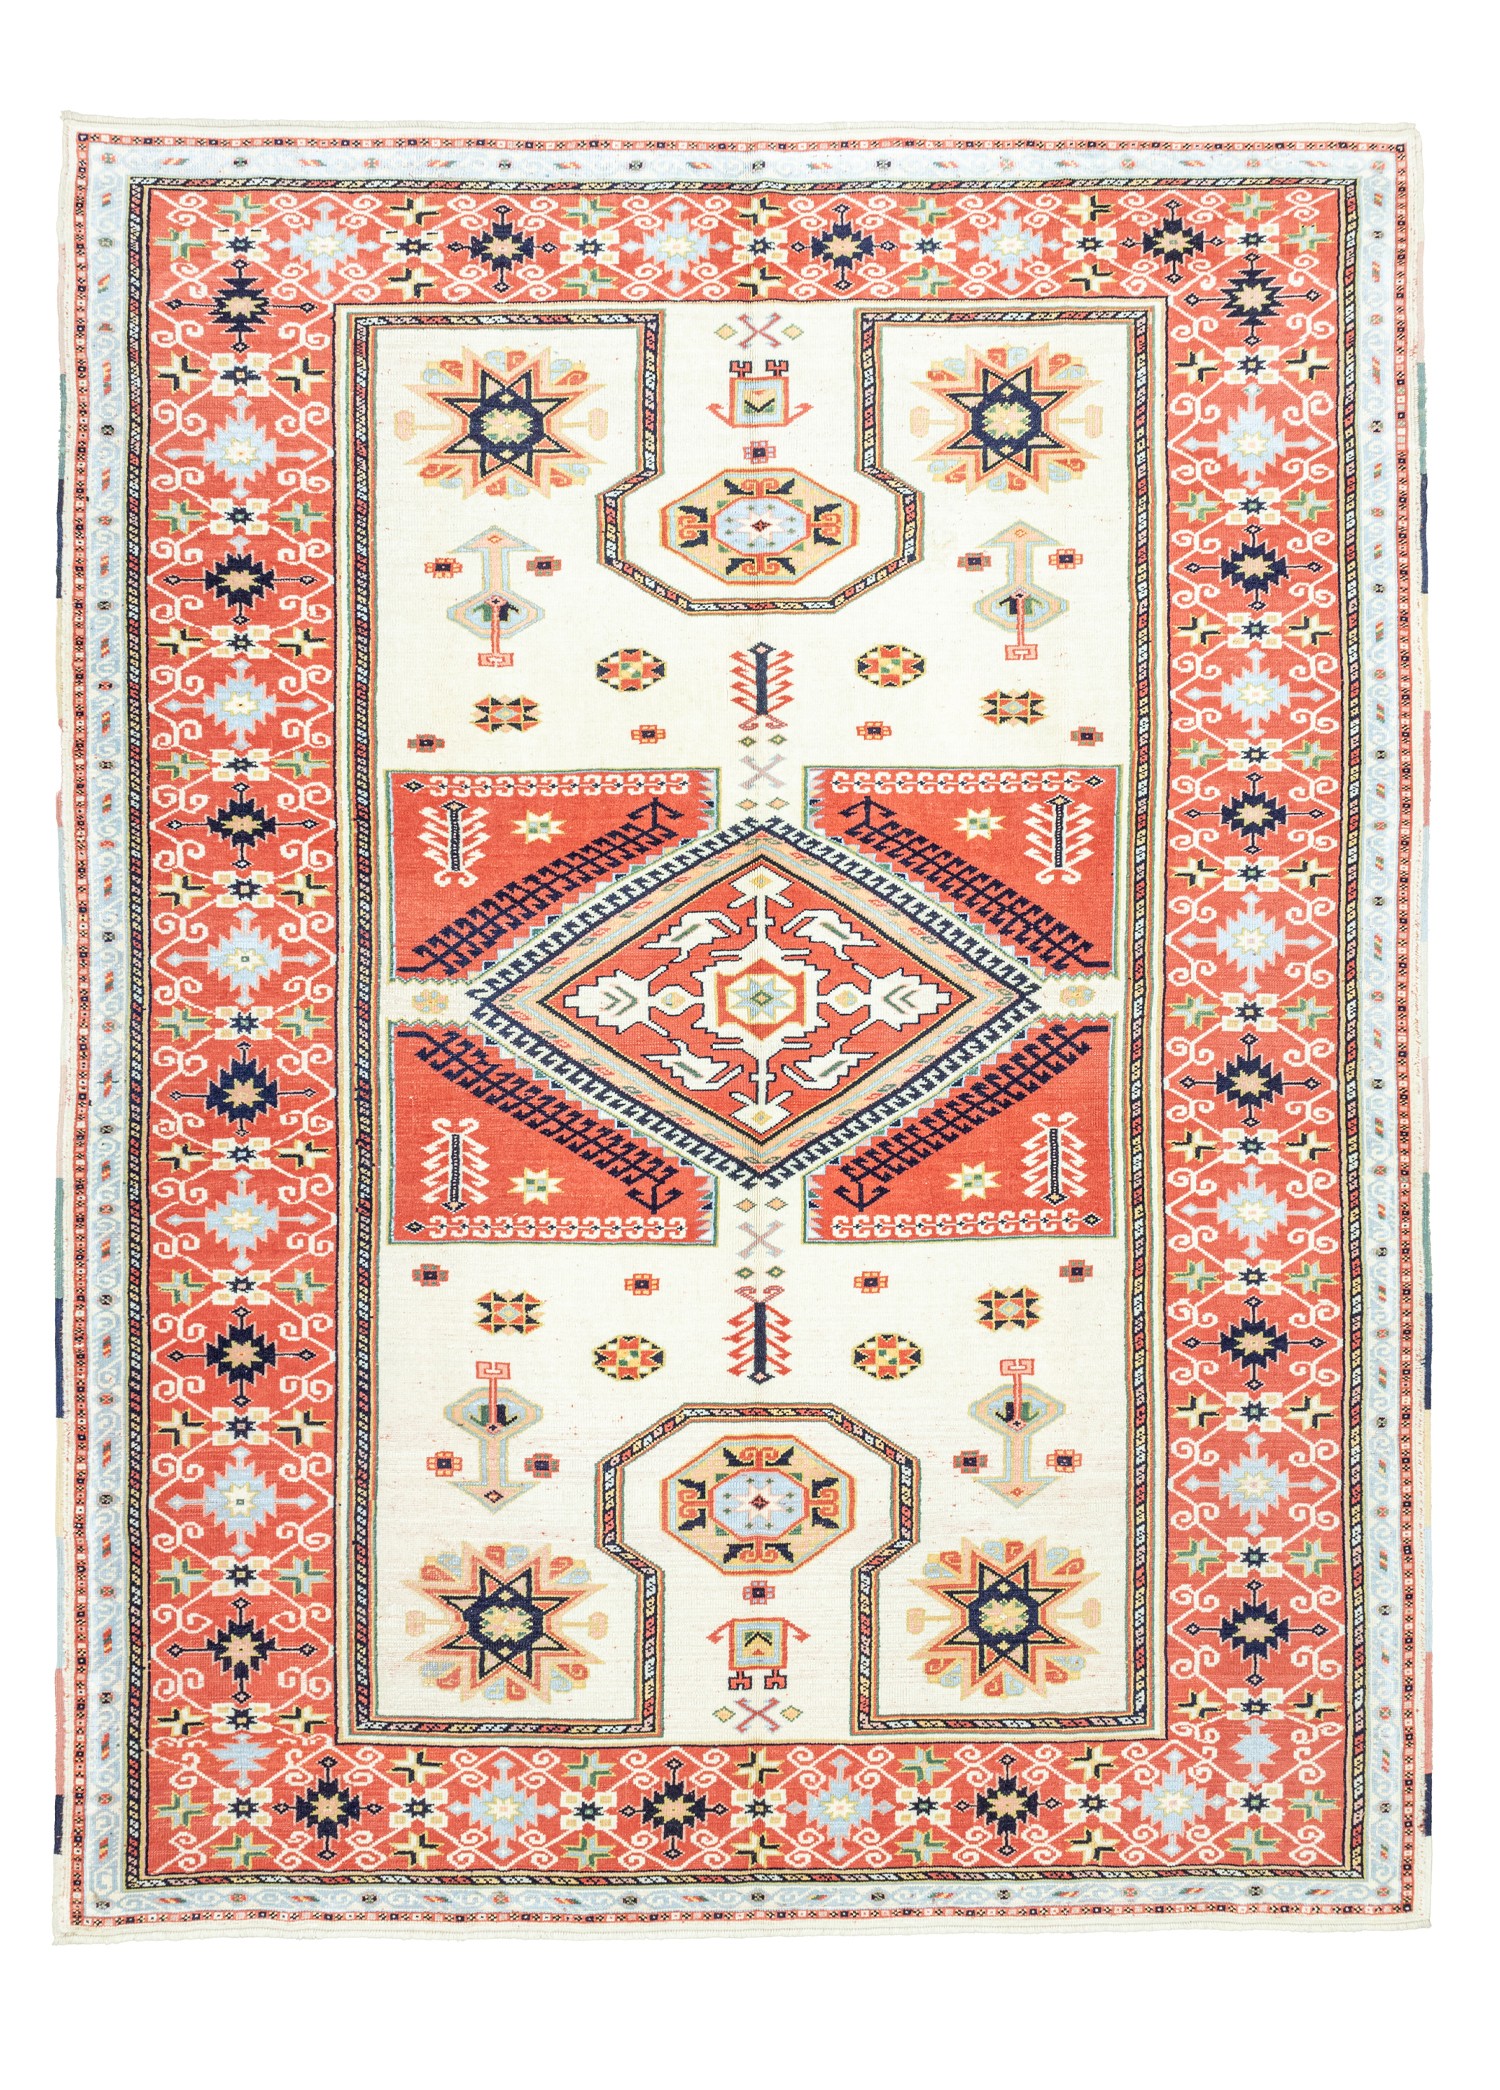 Orchis Hand-Woven Geometric Designed Wool Rug 221x288 cm